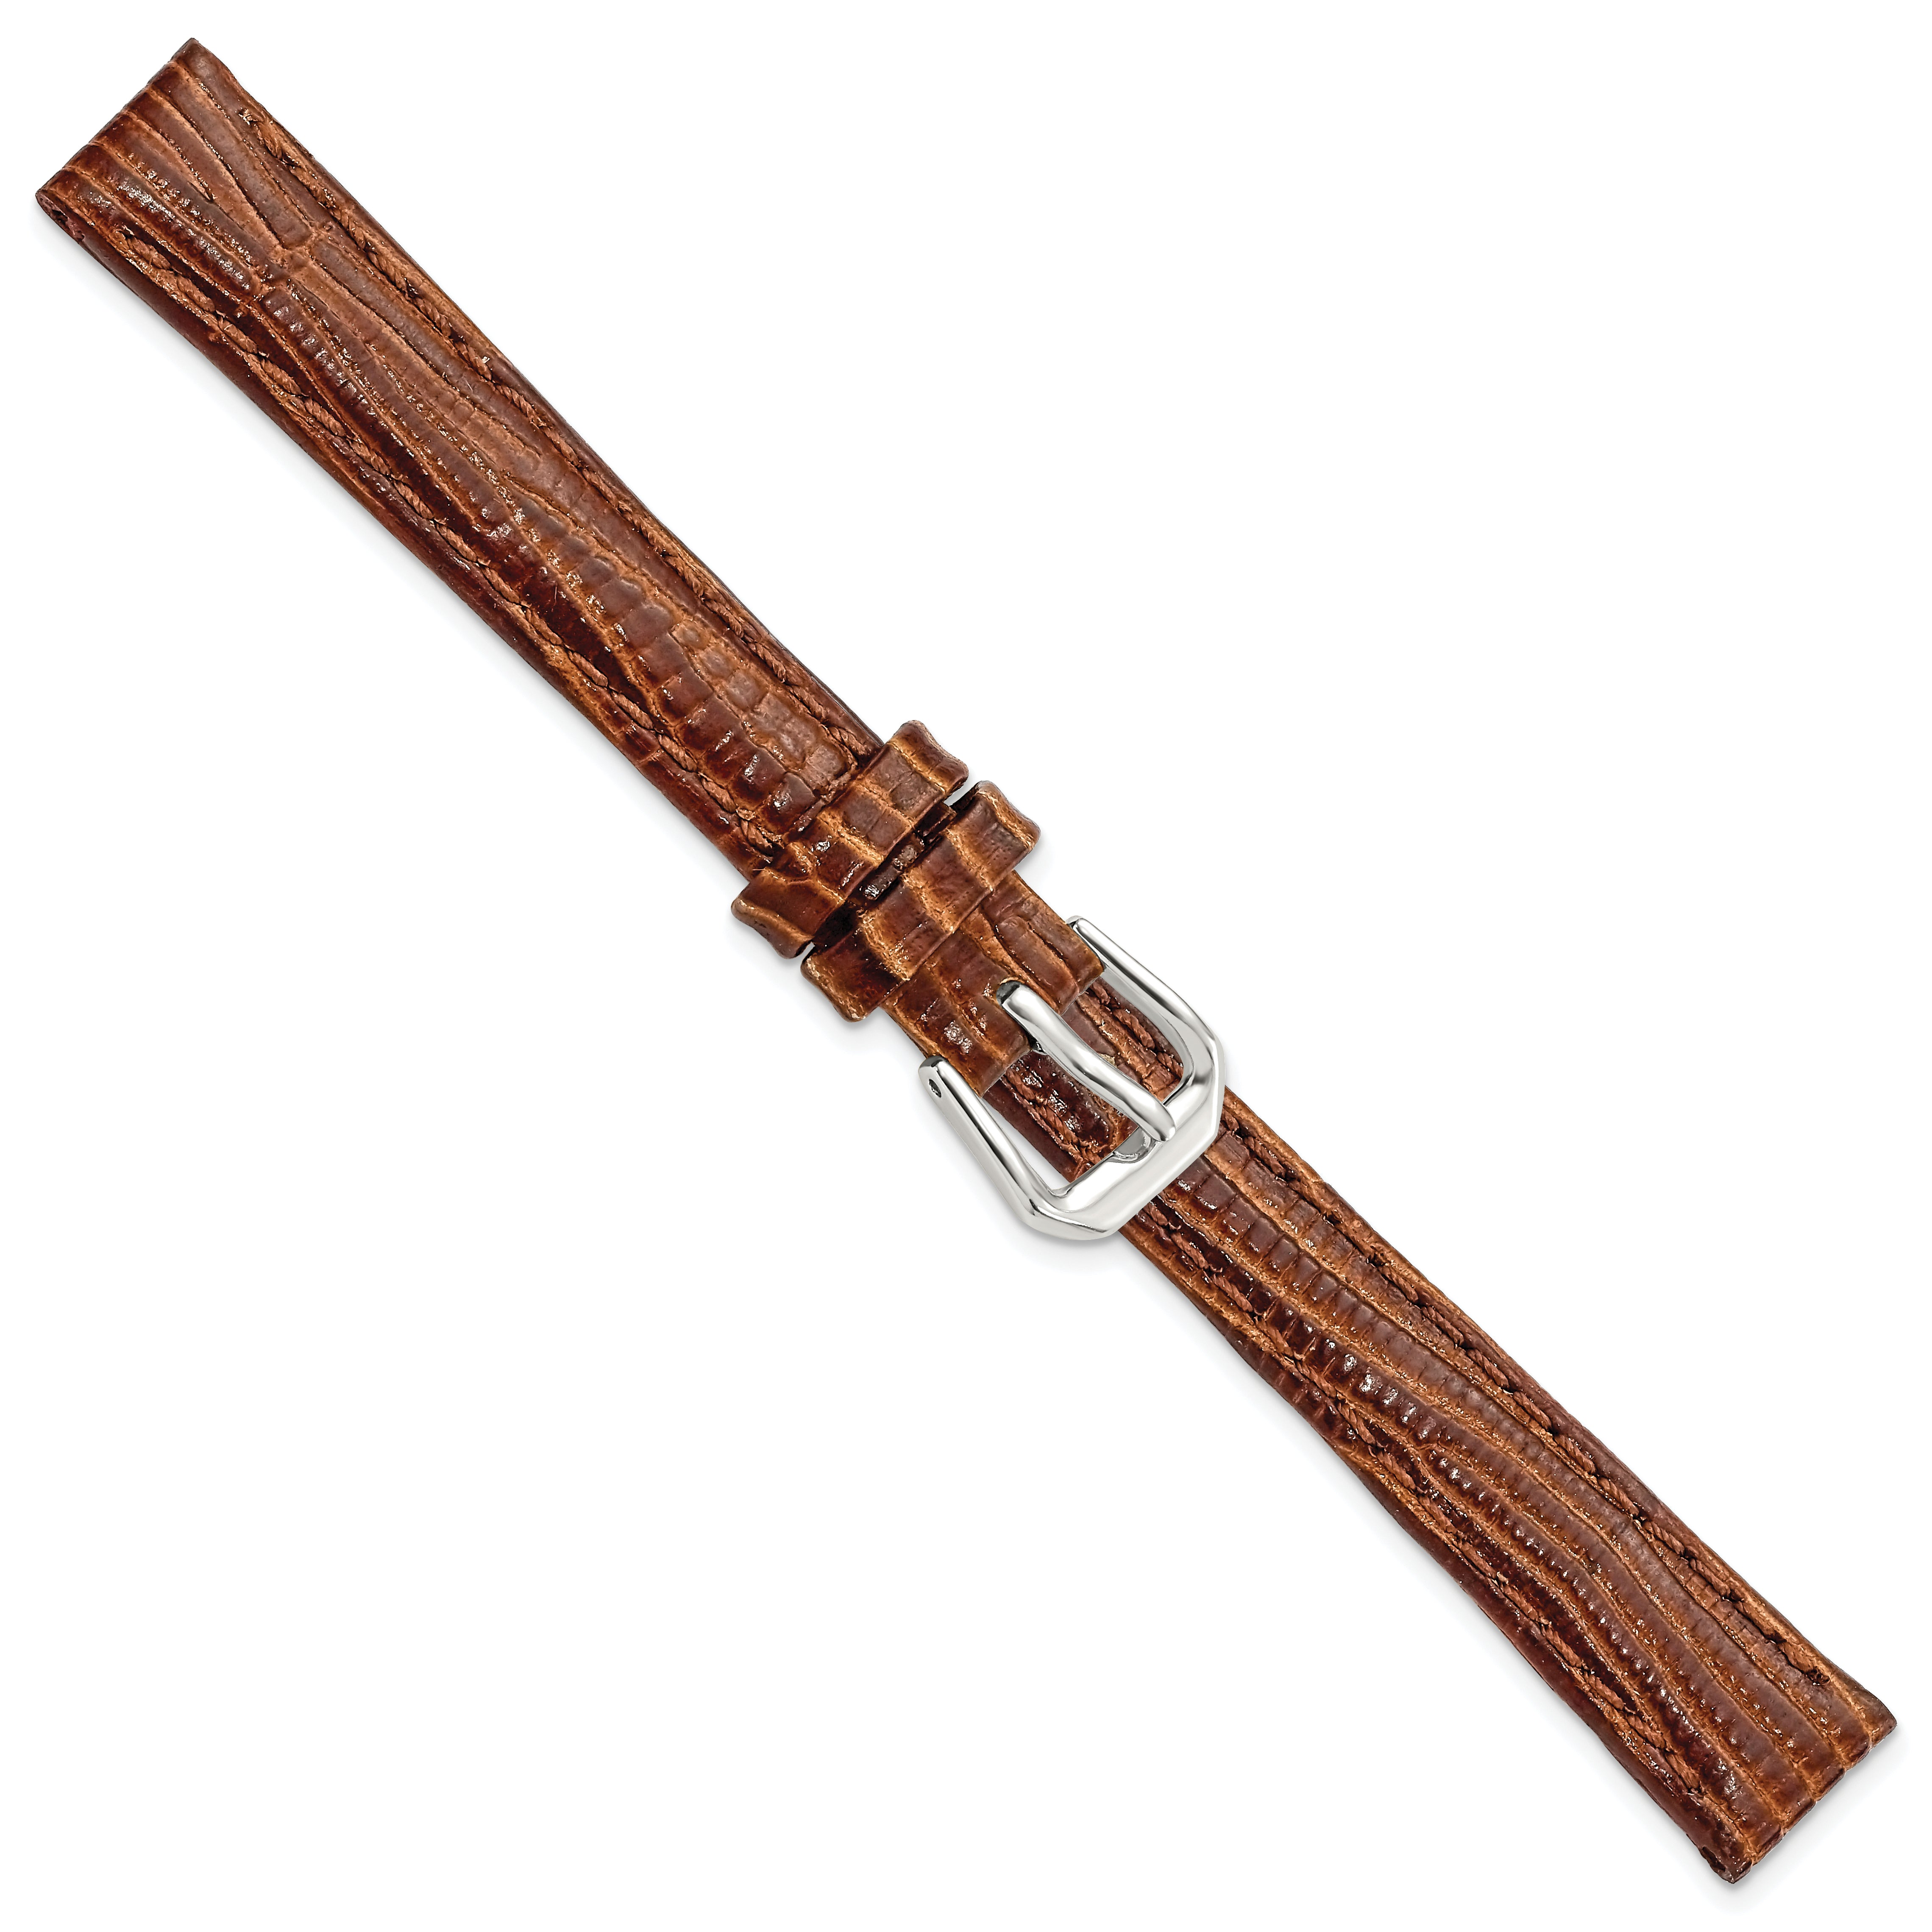 12mm Havana Brown Snake Grain Leather with Silver-tone Buckle 6.75 inch Watch Band